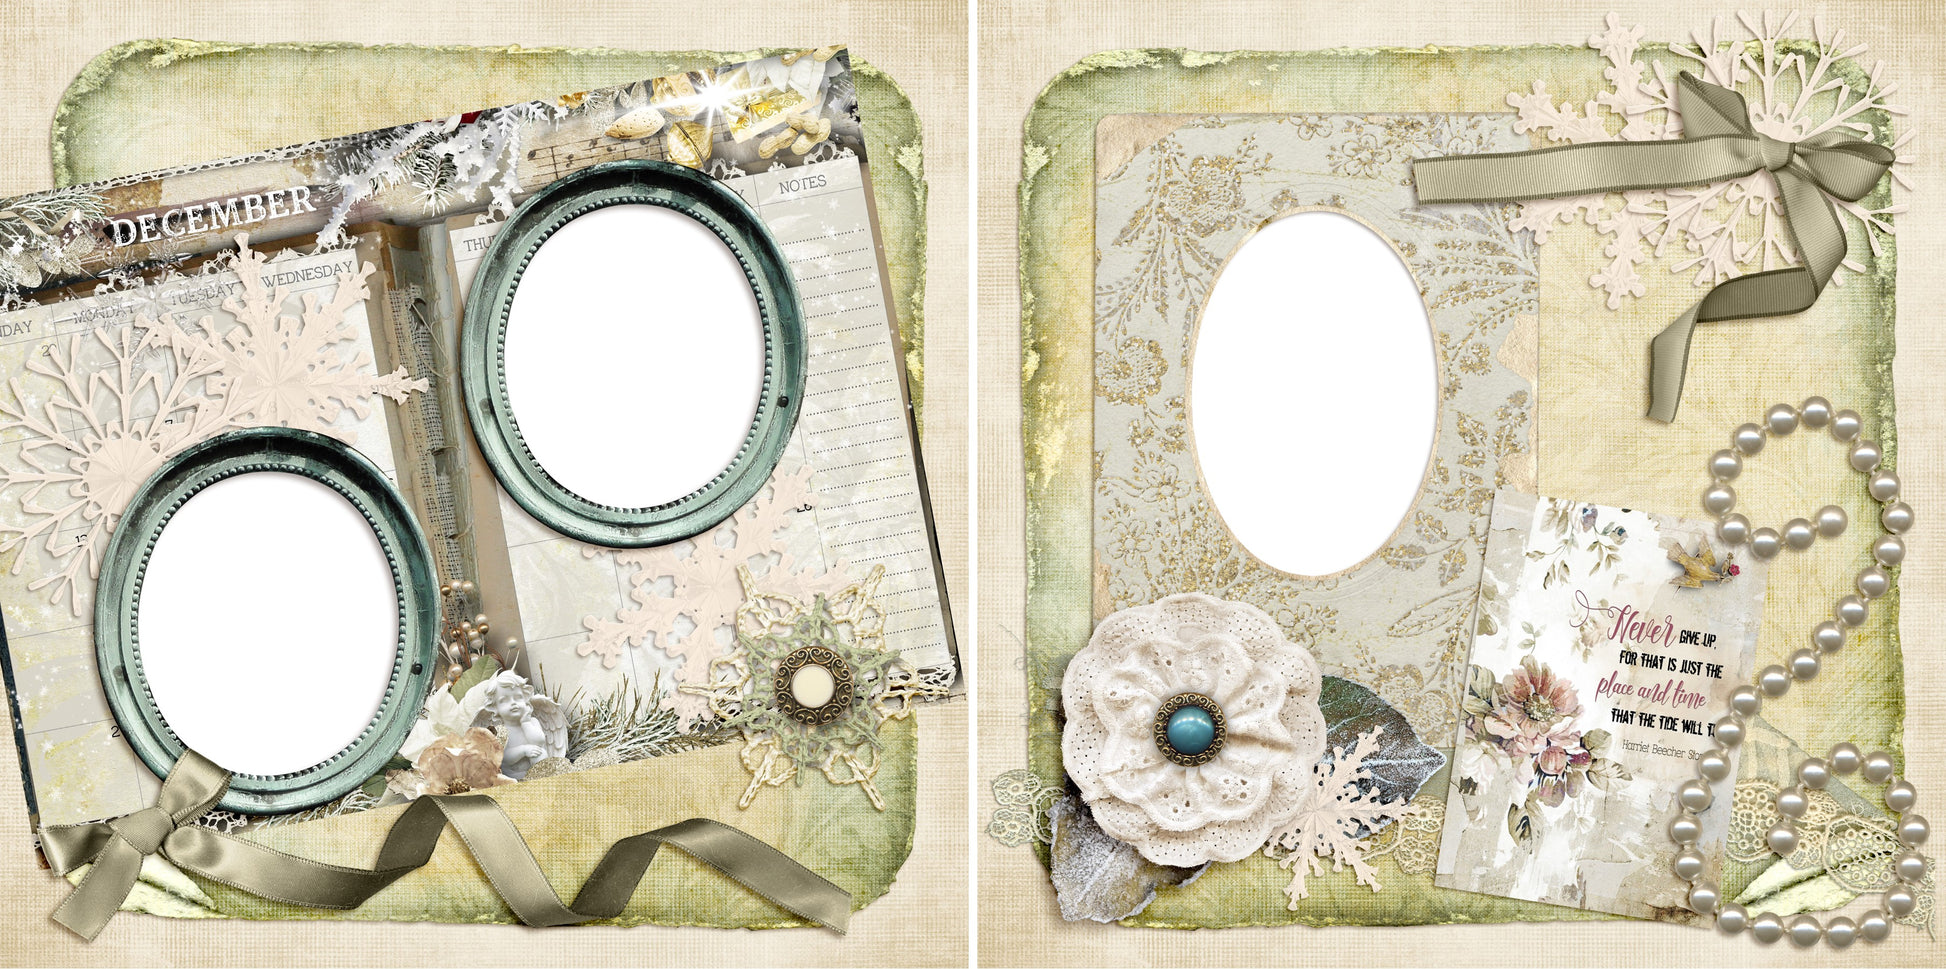 December - Digital Scrapbook Pages - INSTANT DOWNLOAD - EZscrapbooks Scrapbook Layouts Months of the Year